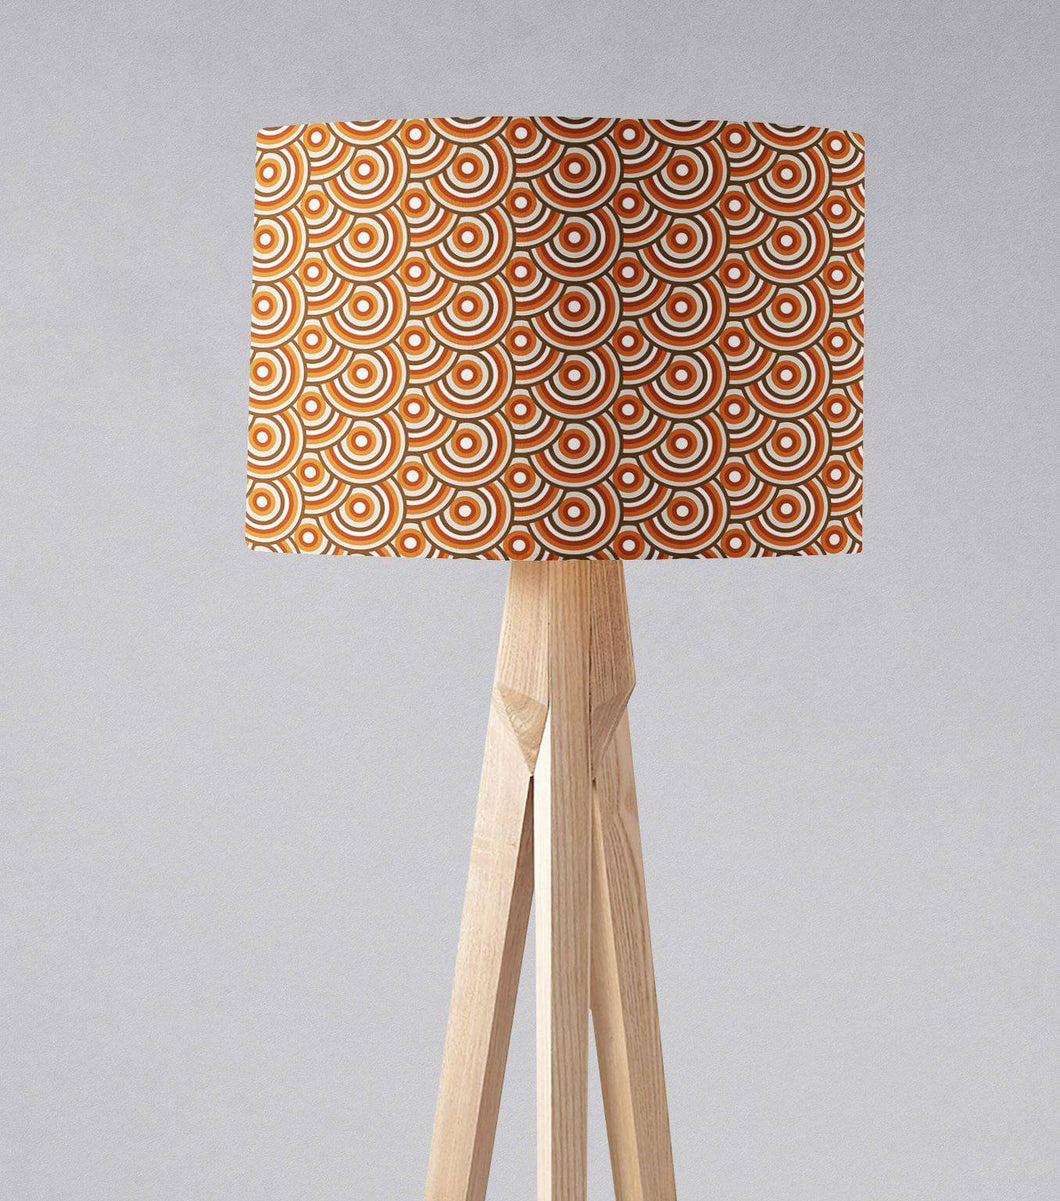 Brown Retro 1970's Circles Design Lampshade, Ceiling or Table Lamp Shade - Shadow bright